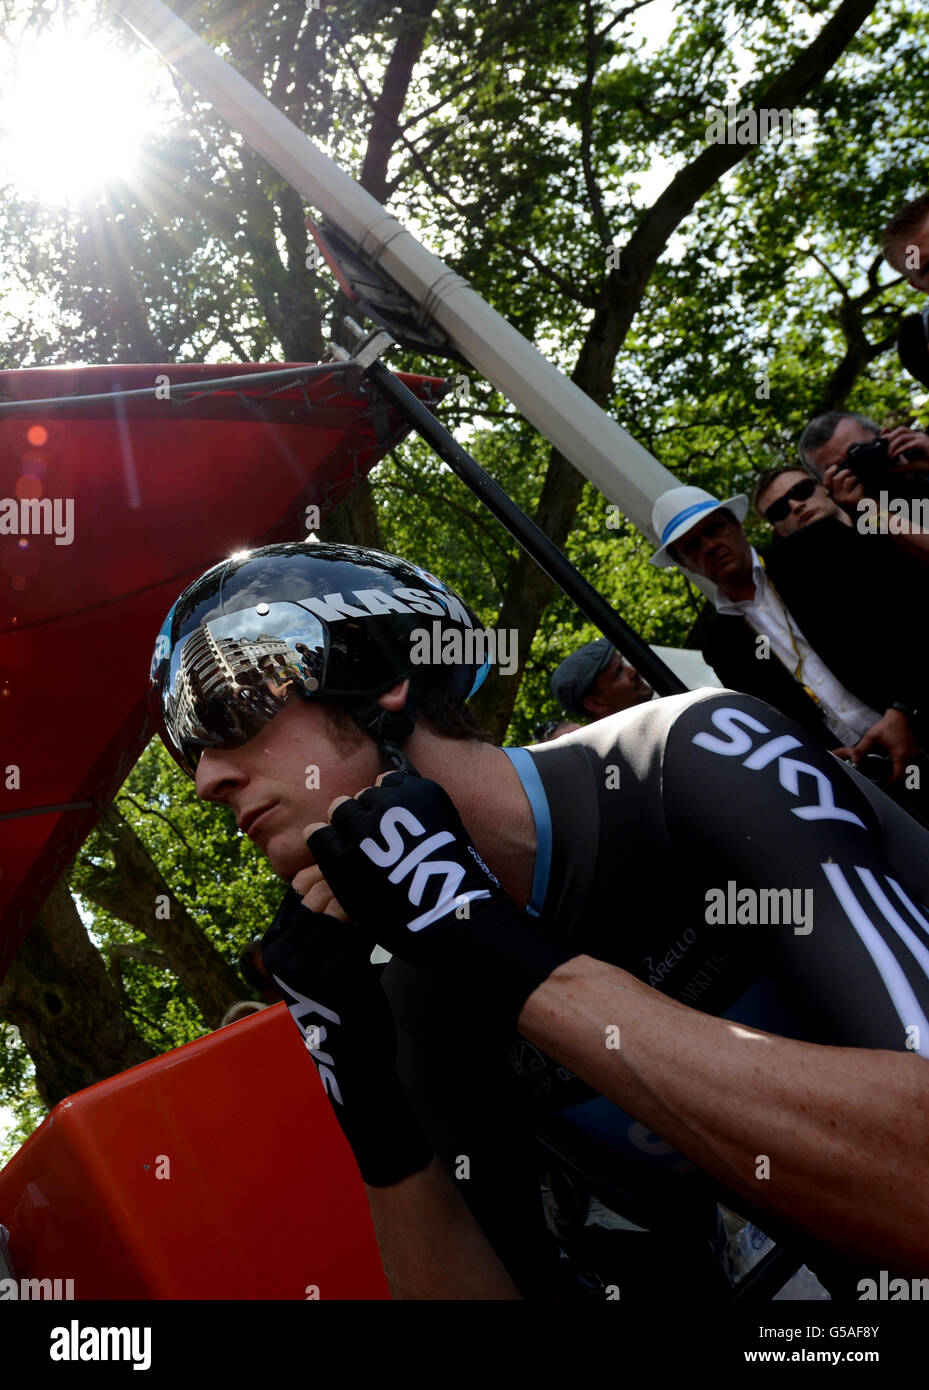 Team Sky Procycling's Bradley Wiggins during the Prologue Stage of the 2012 Tour de France in Liege, Belgium. Stock Photo